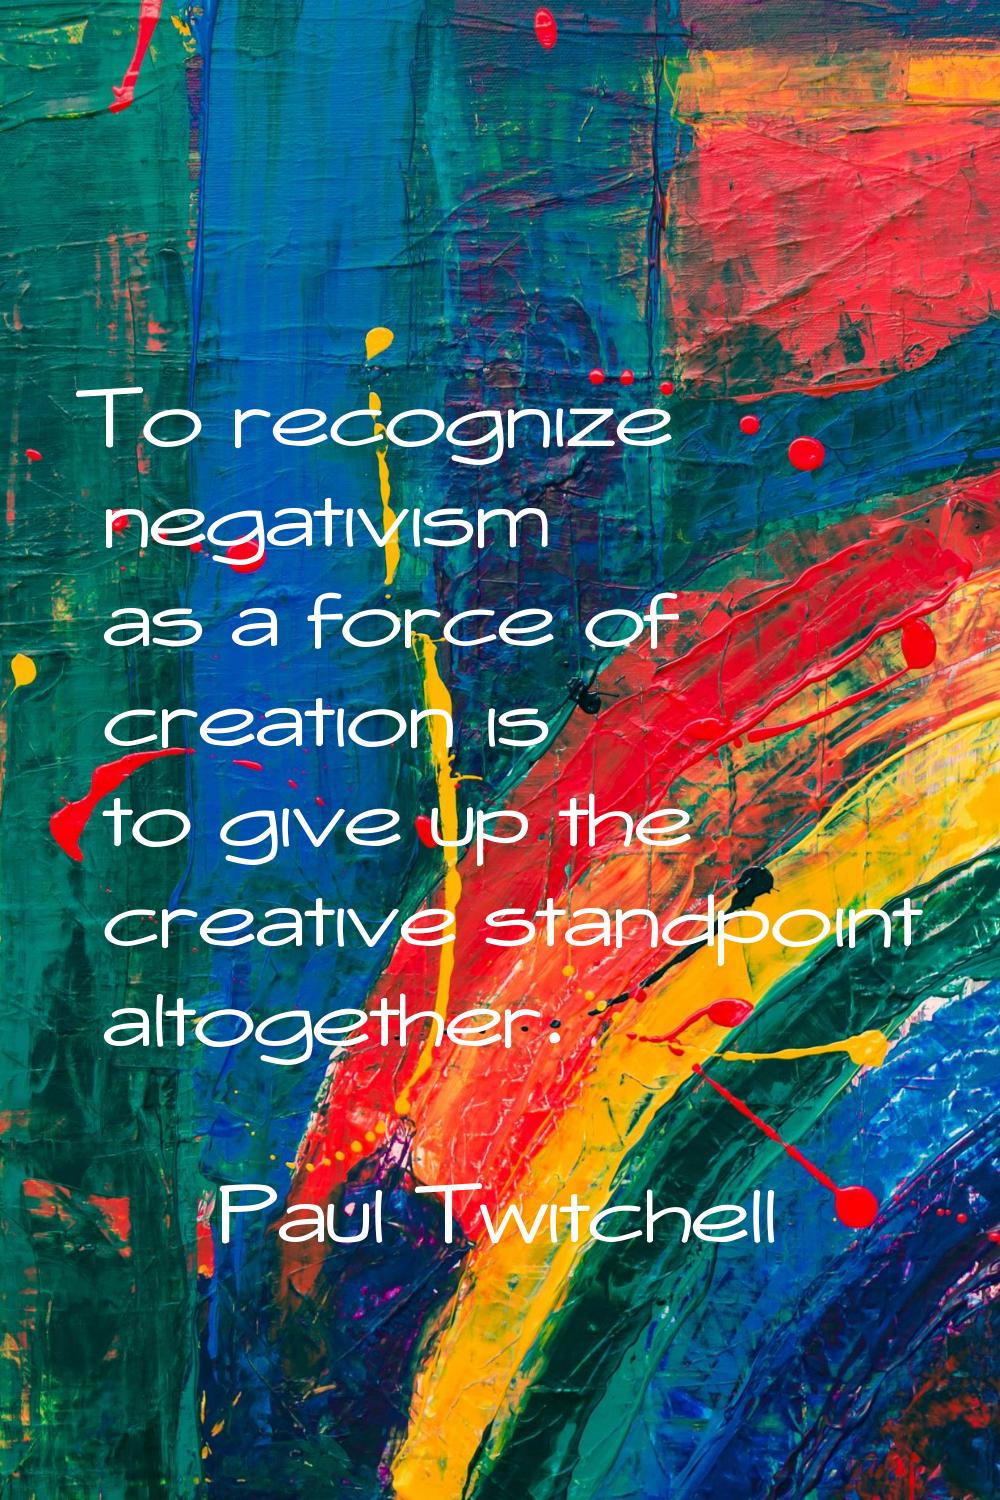 To recognize negativism as a force of creation is to give up the creative standpoint altogether.